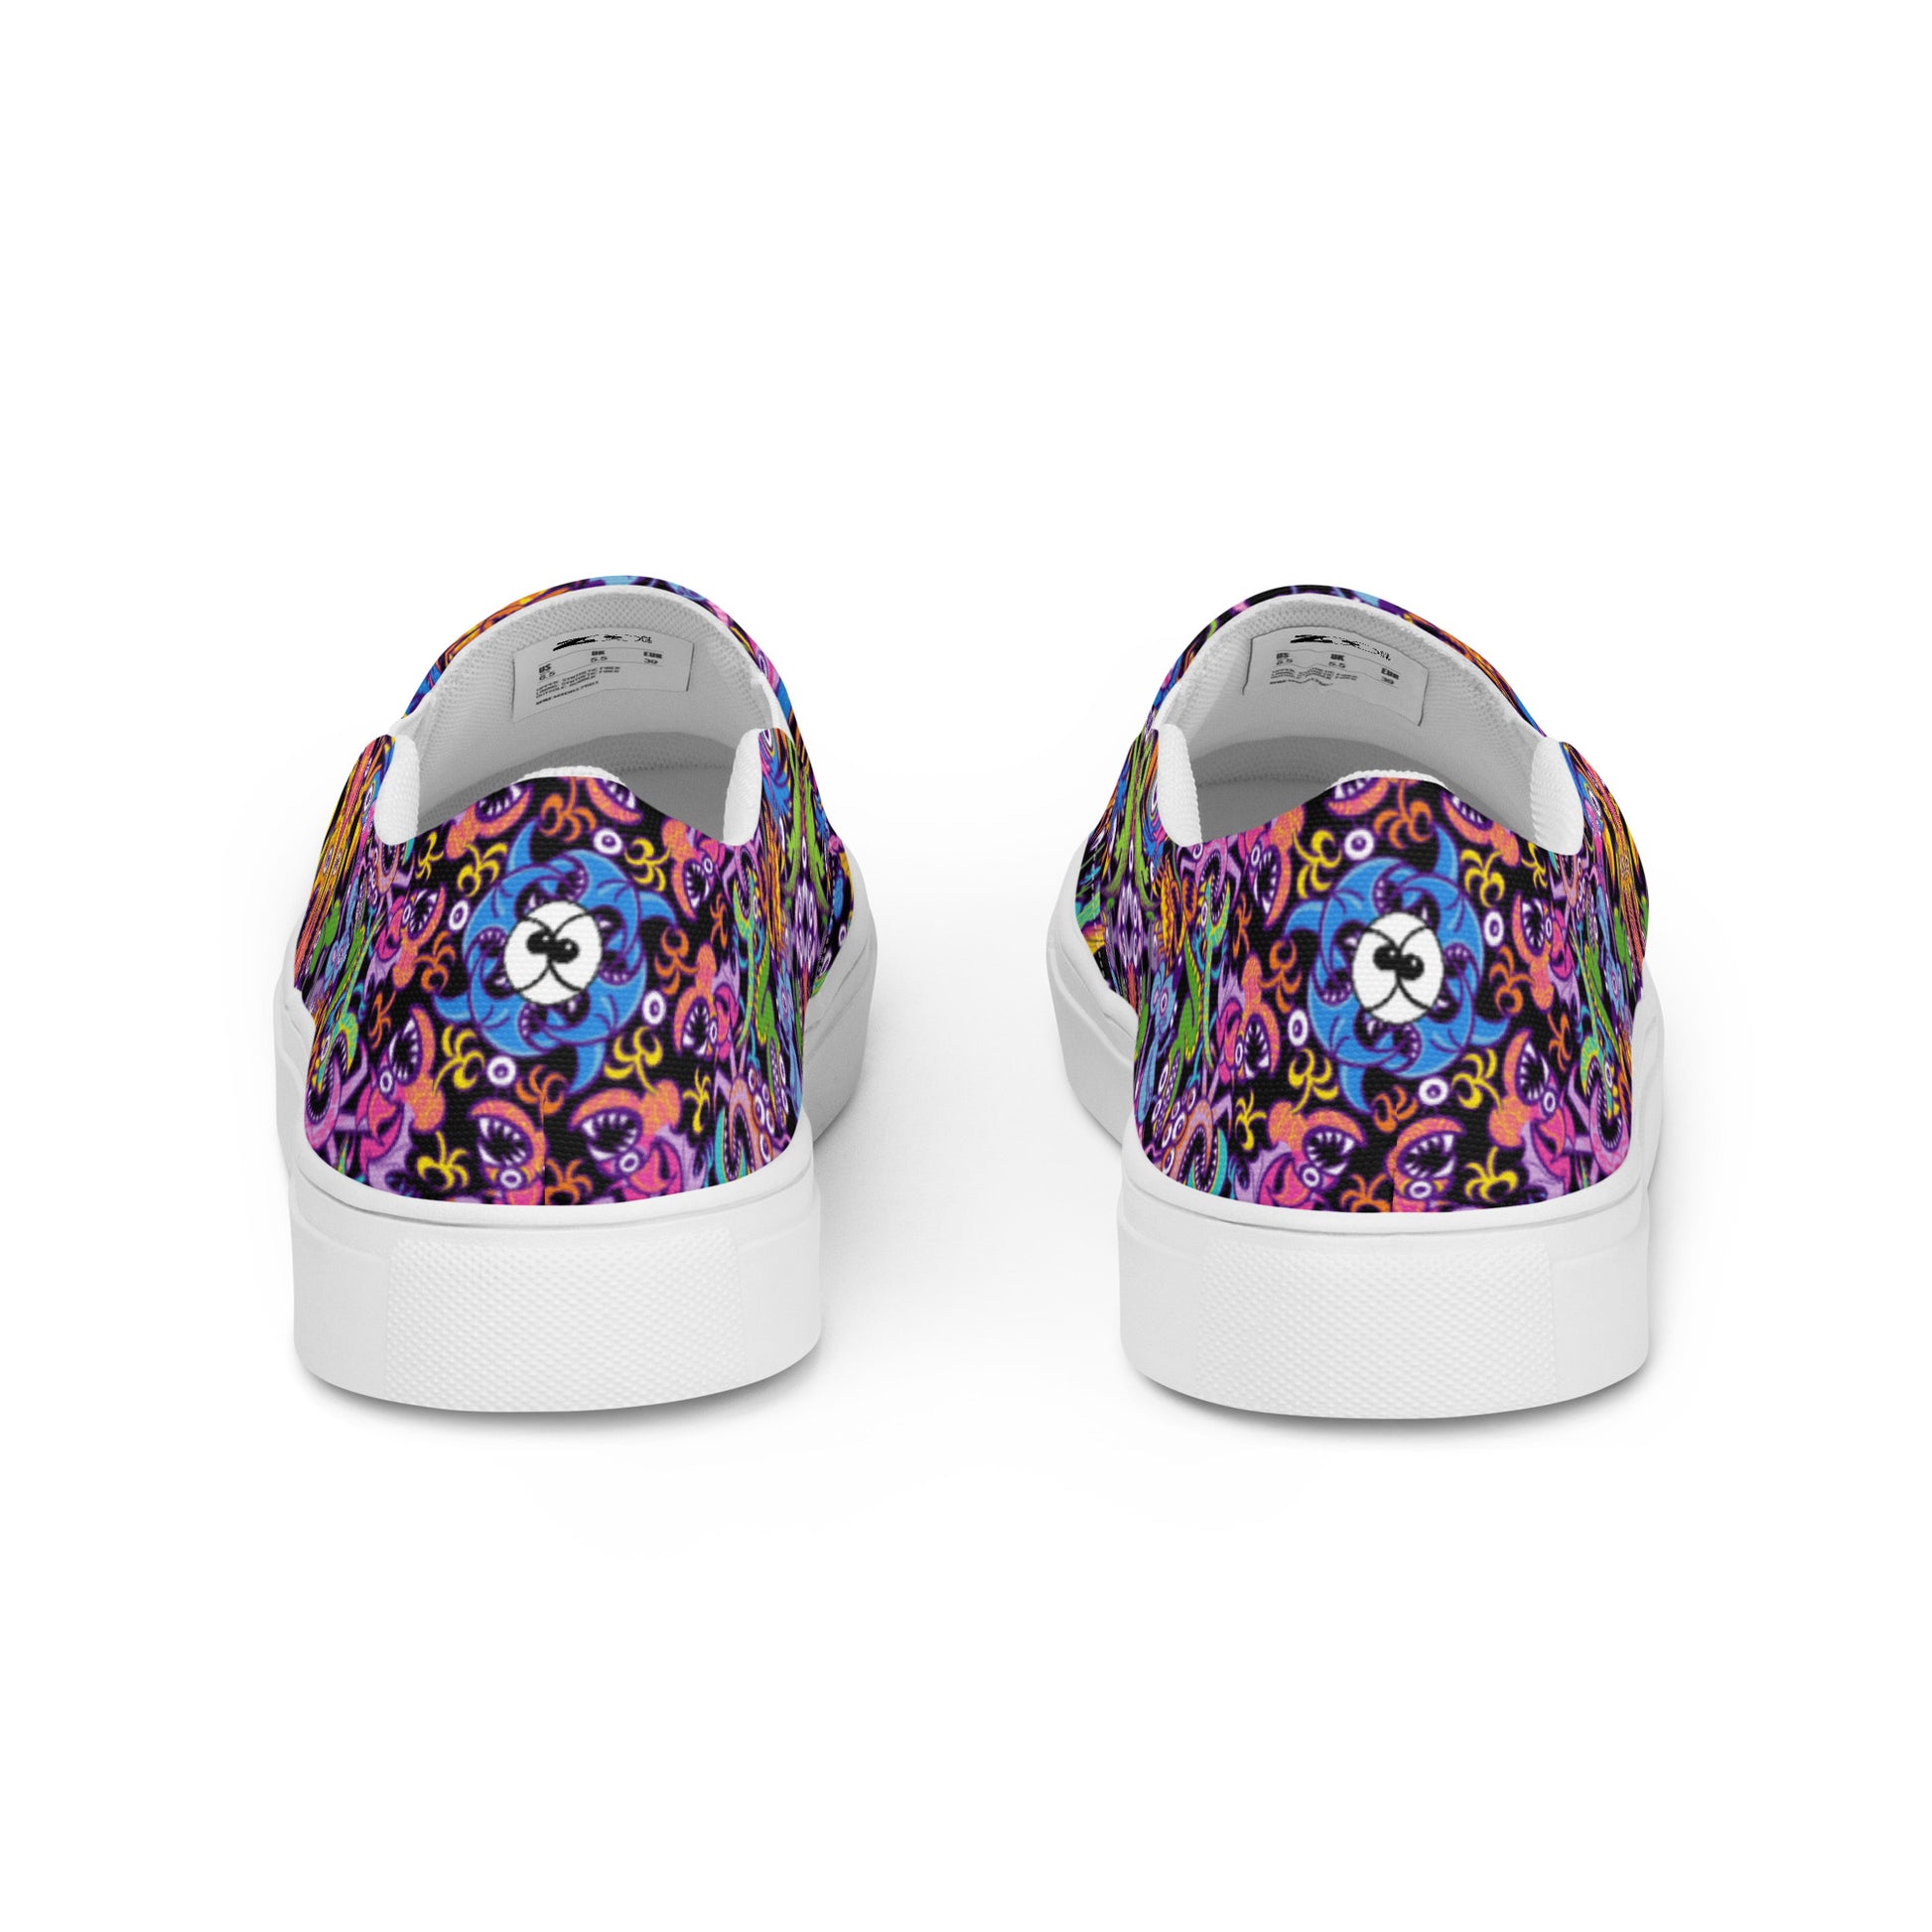 Eccentric critters in a crazy lively festival Women’s slip-on canvas shoes. Back view